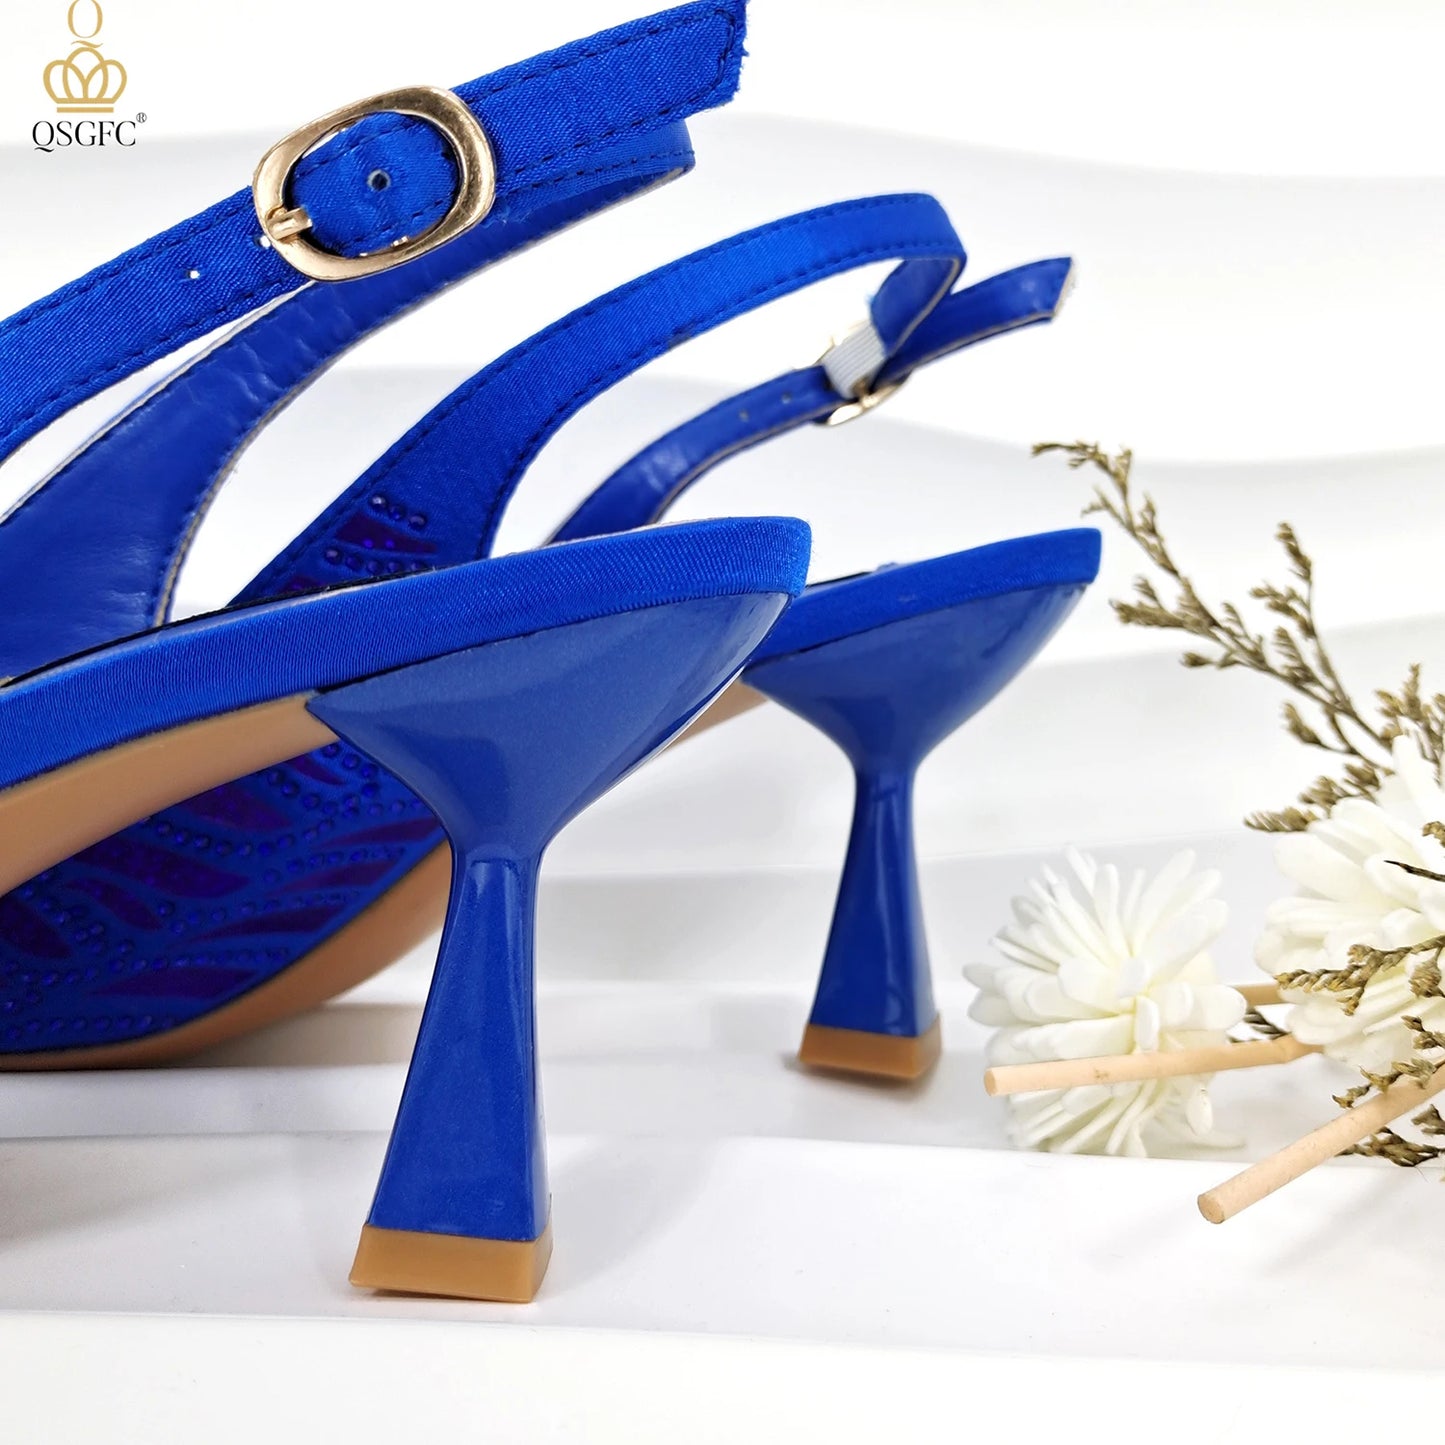 QSGFC New Arrival Fashion Shoes Matching Bag Set Royal Blue Color Decorated with Crystal Ladies Wedding Party Women High Heel